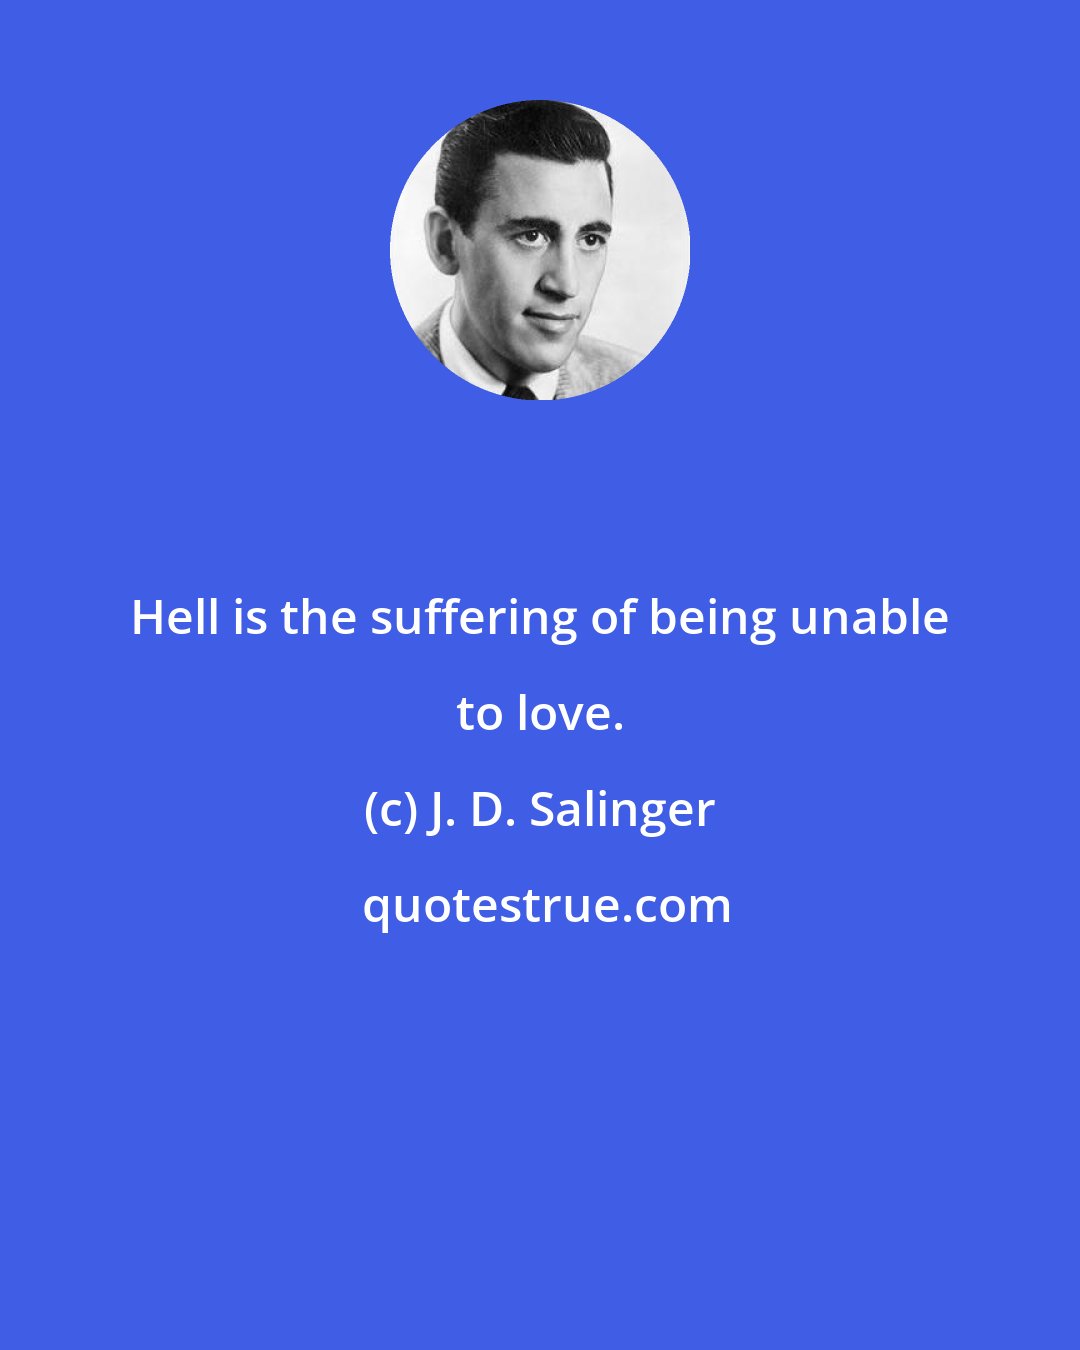 J. D. Salinger: Hell is the suffering of being unable to love.